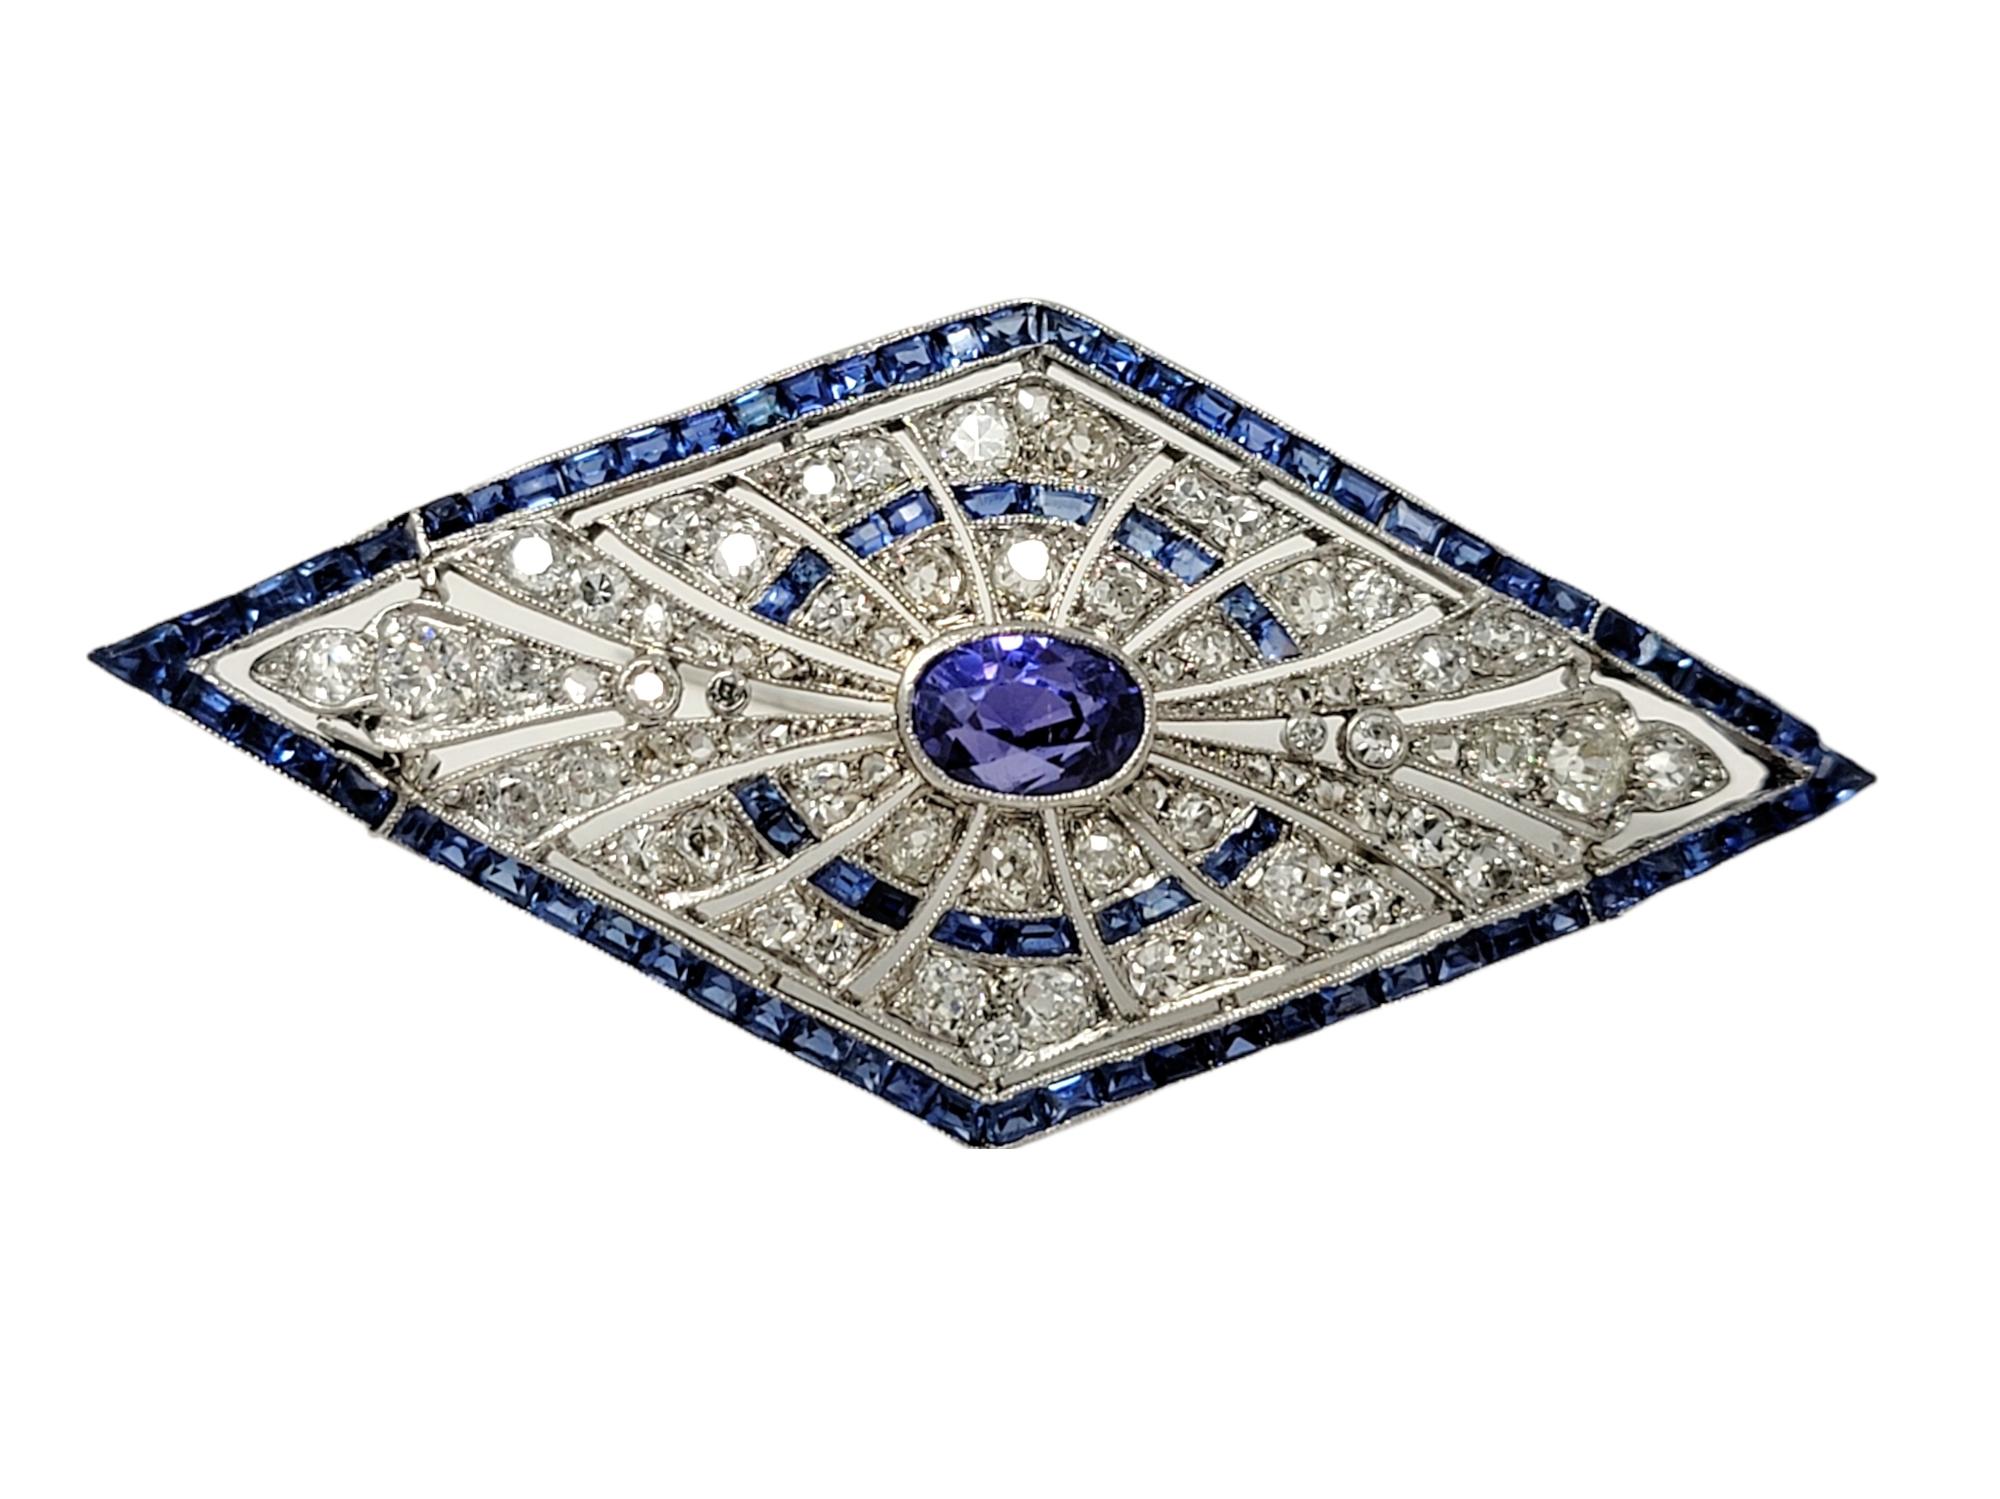 Art Deco Vintage Oval Mixed Cut Sapphire and Diamond Brooch in Platinum 8.20 Carats Total For Sale